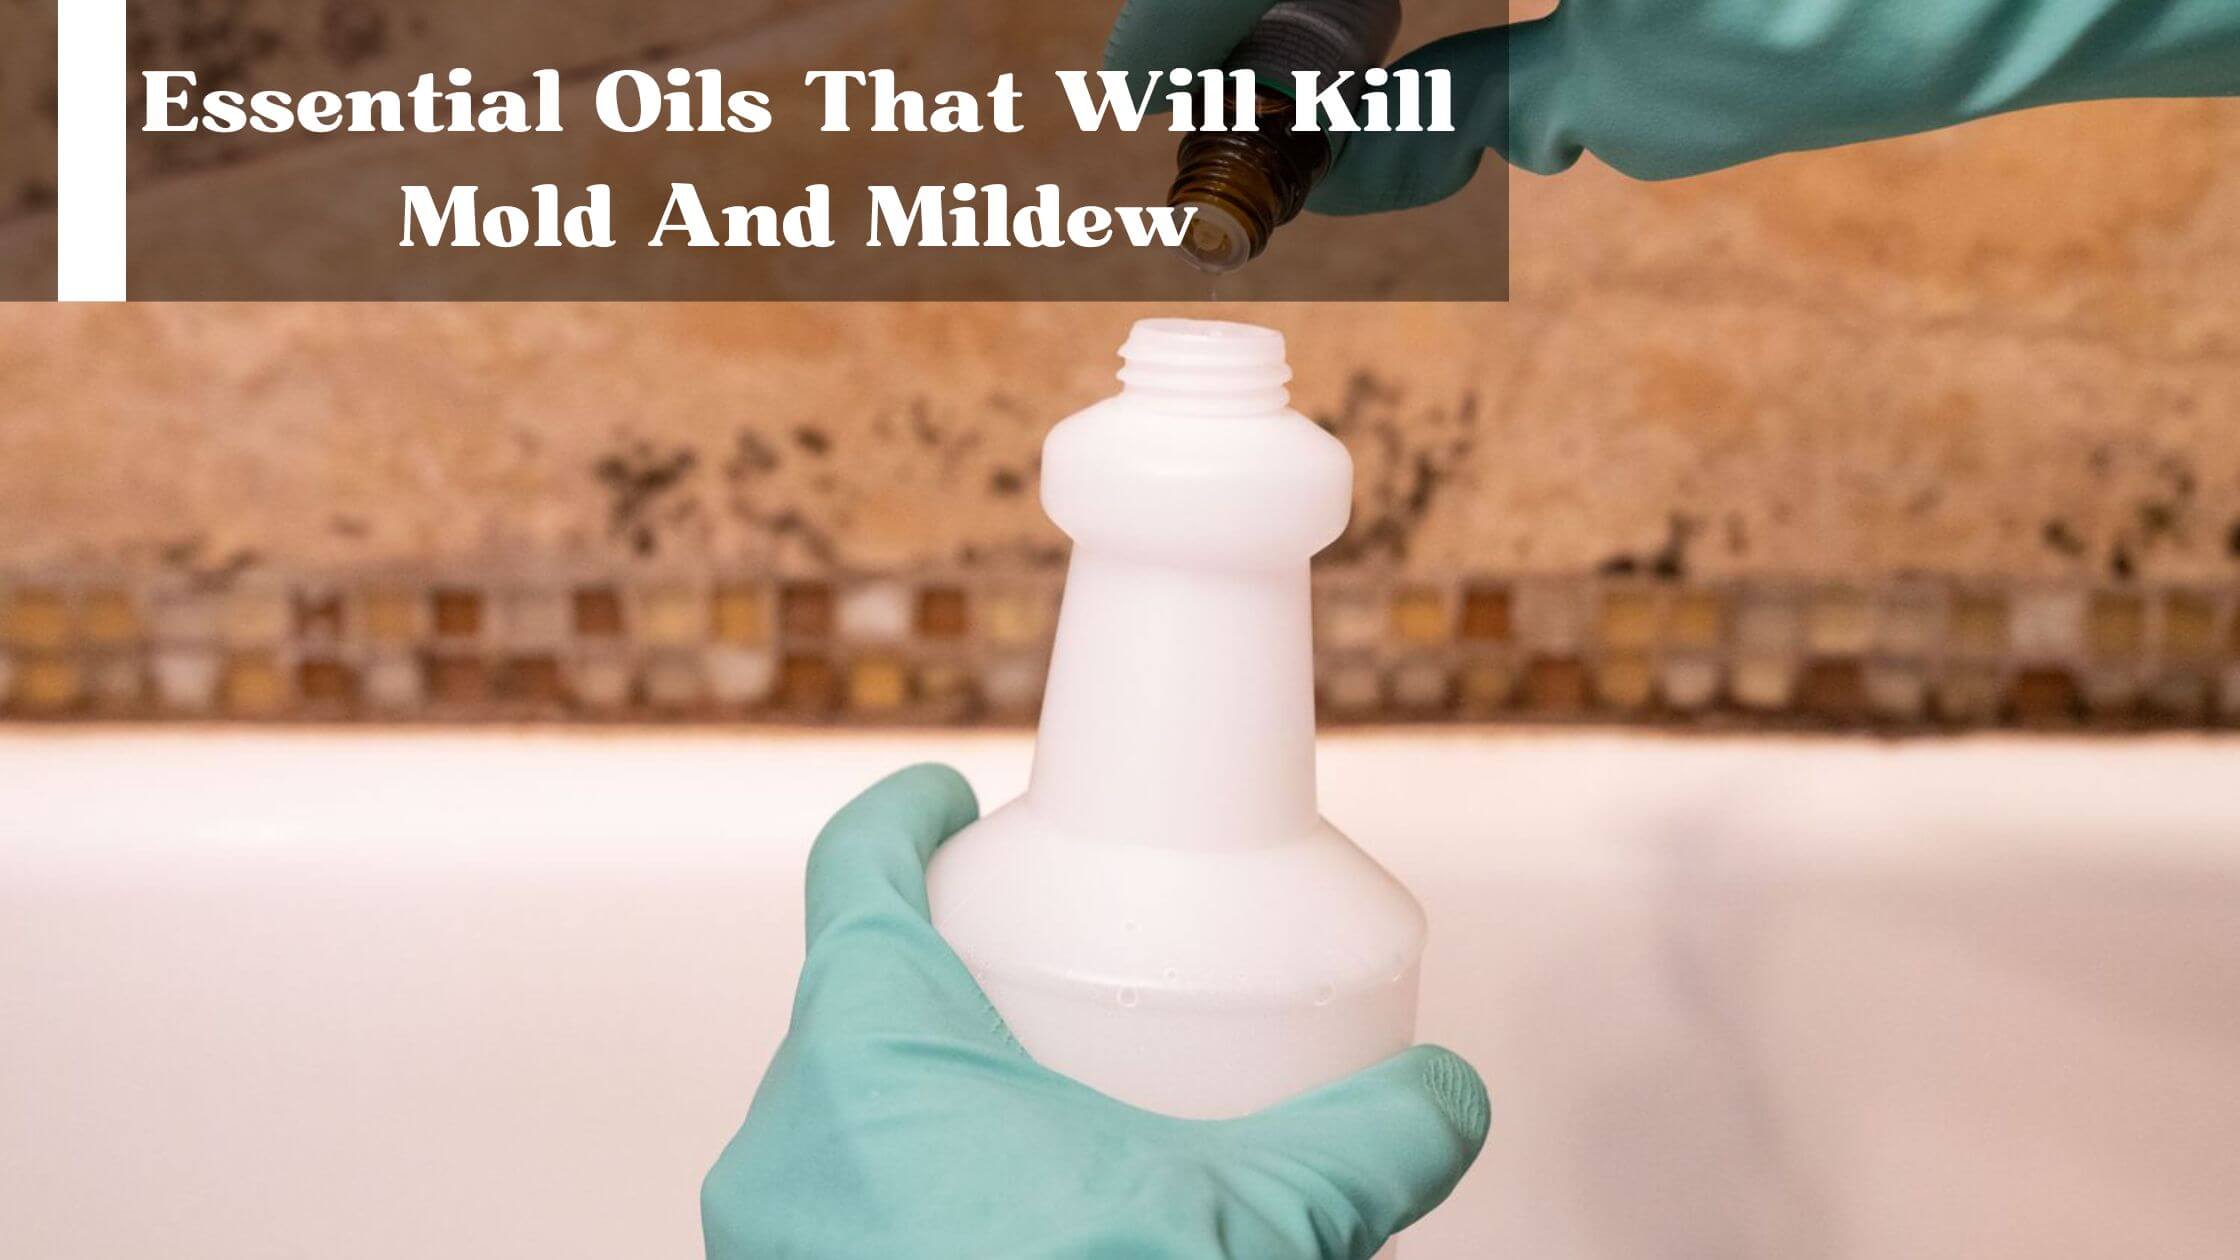 Can You Use Essential Oils For Mold Prevention & Treatment